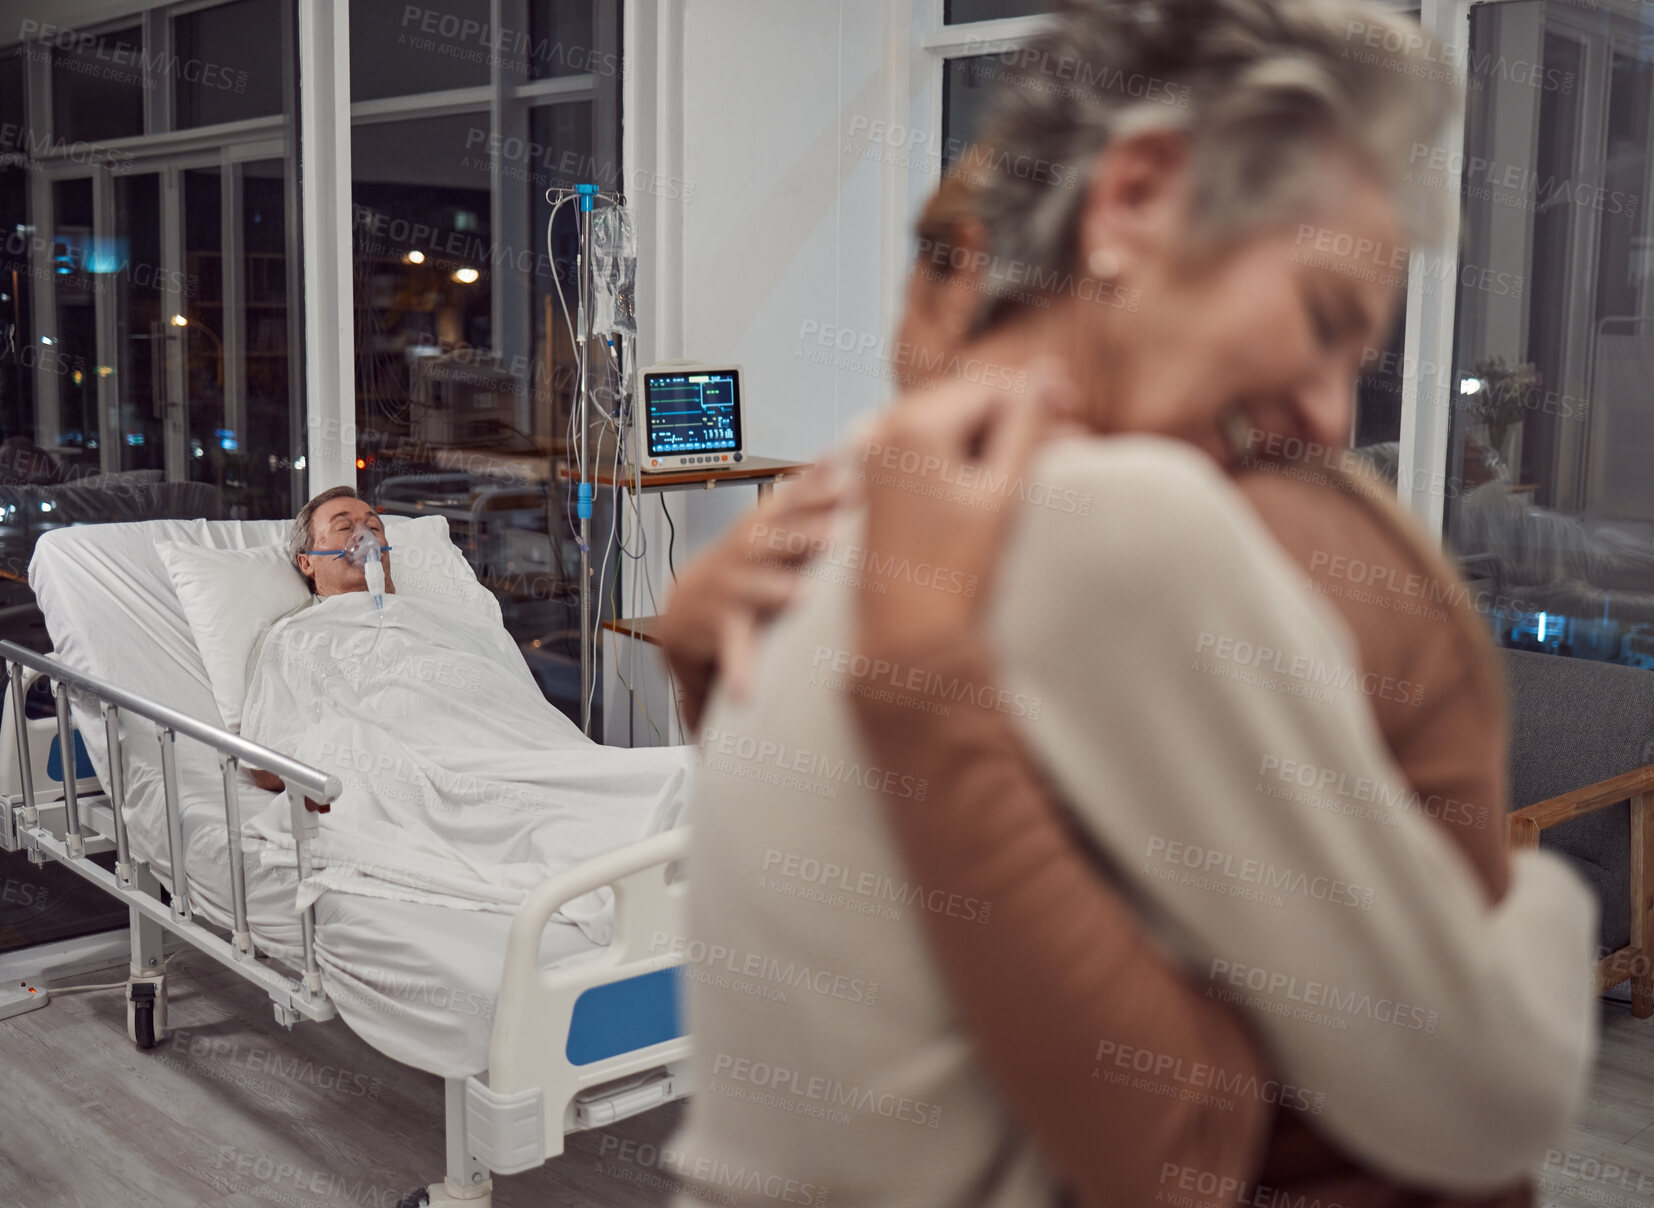 Buy stock photo Hug, support and family at hospital with father lying in bed sick with cancer or illness. Sad, comfort and senior woman and girl hugging, embrace or cuddle for empathy, love and hope for life of man.